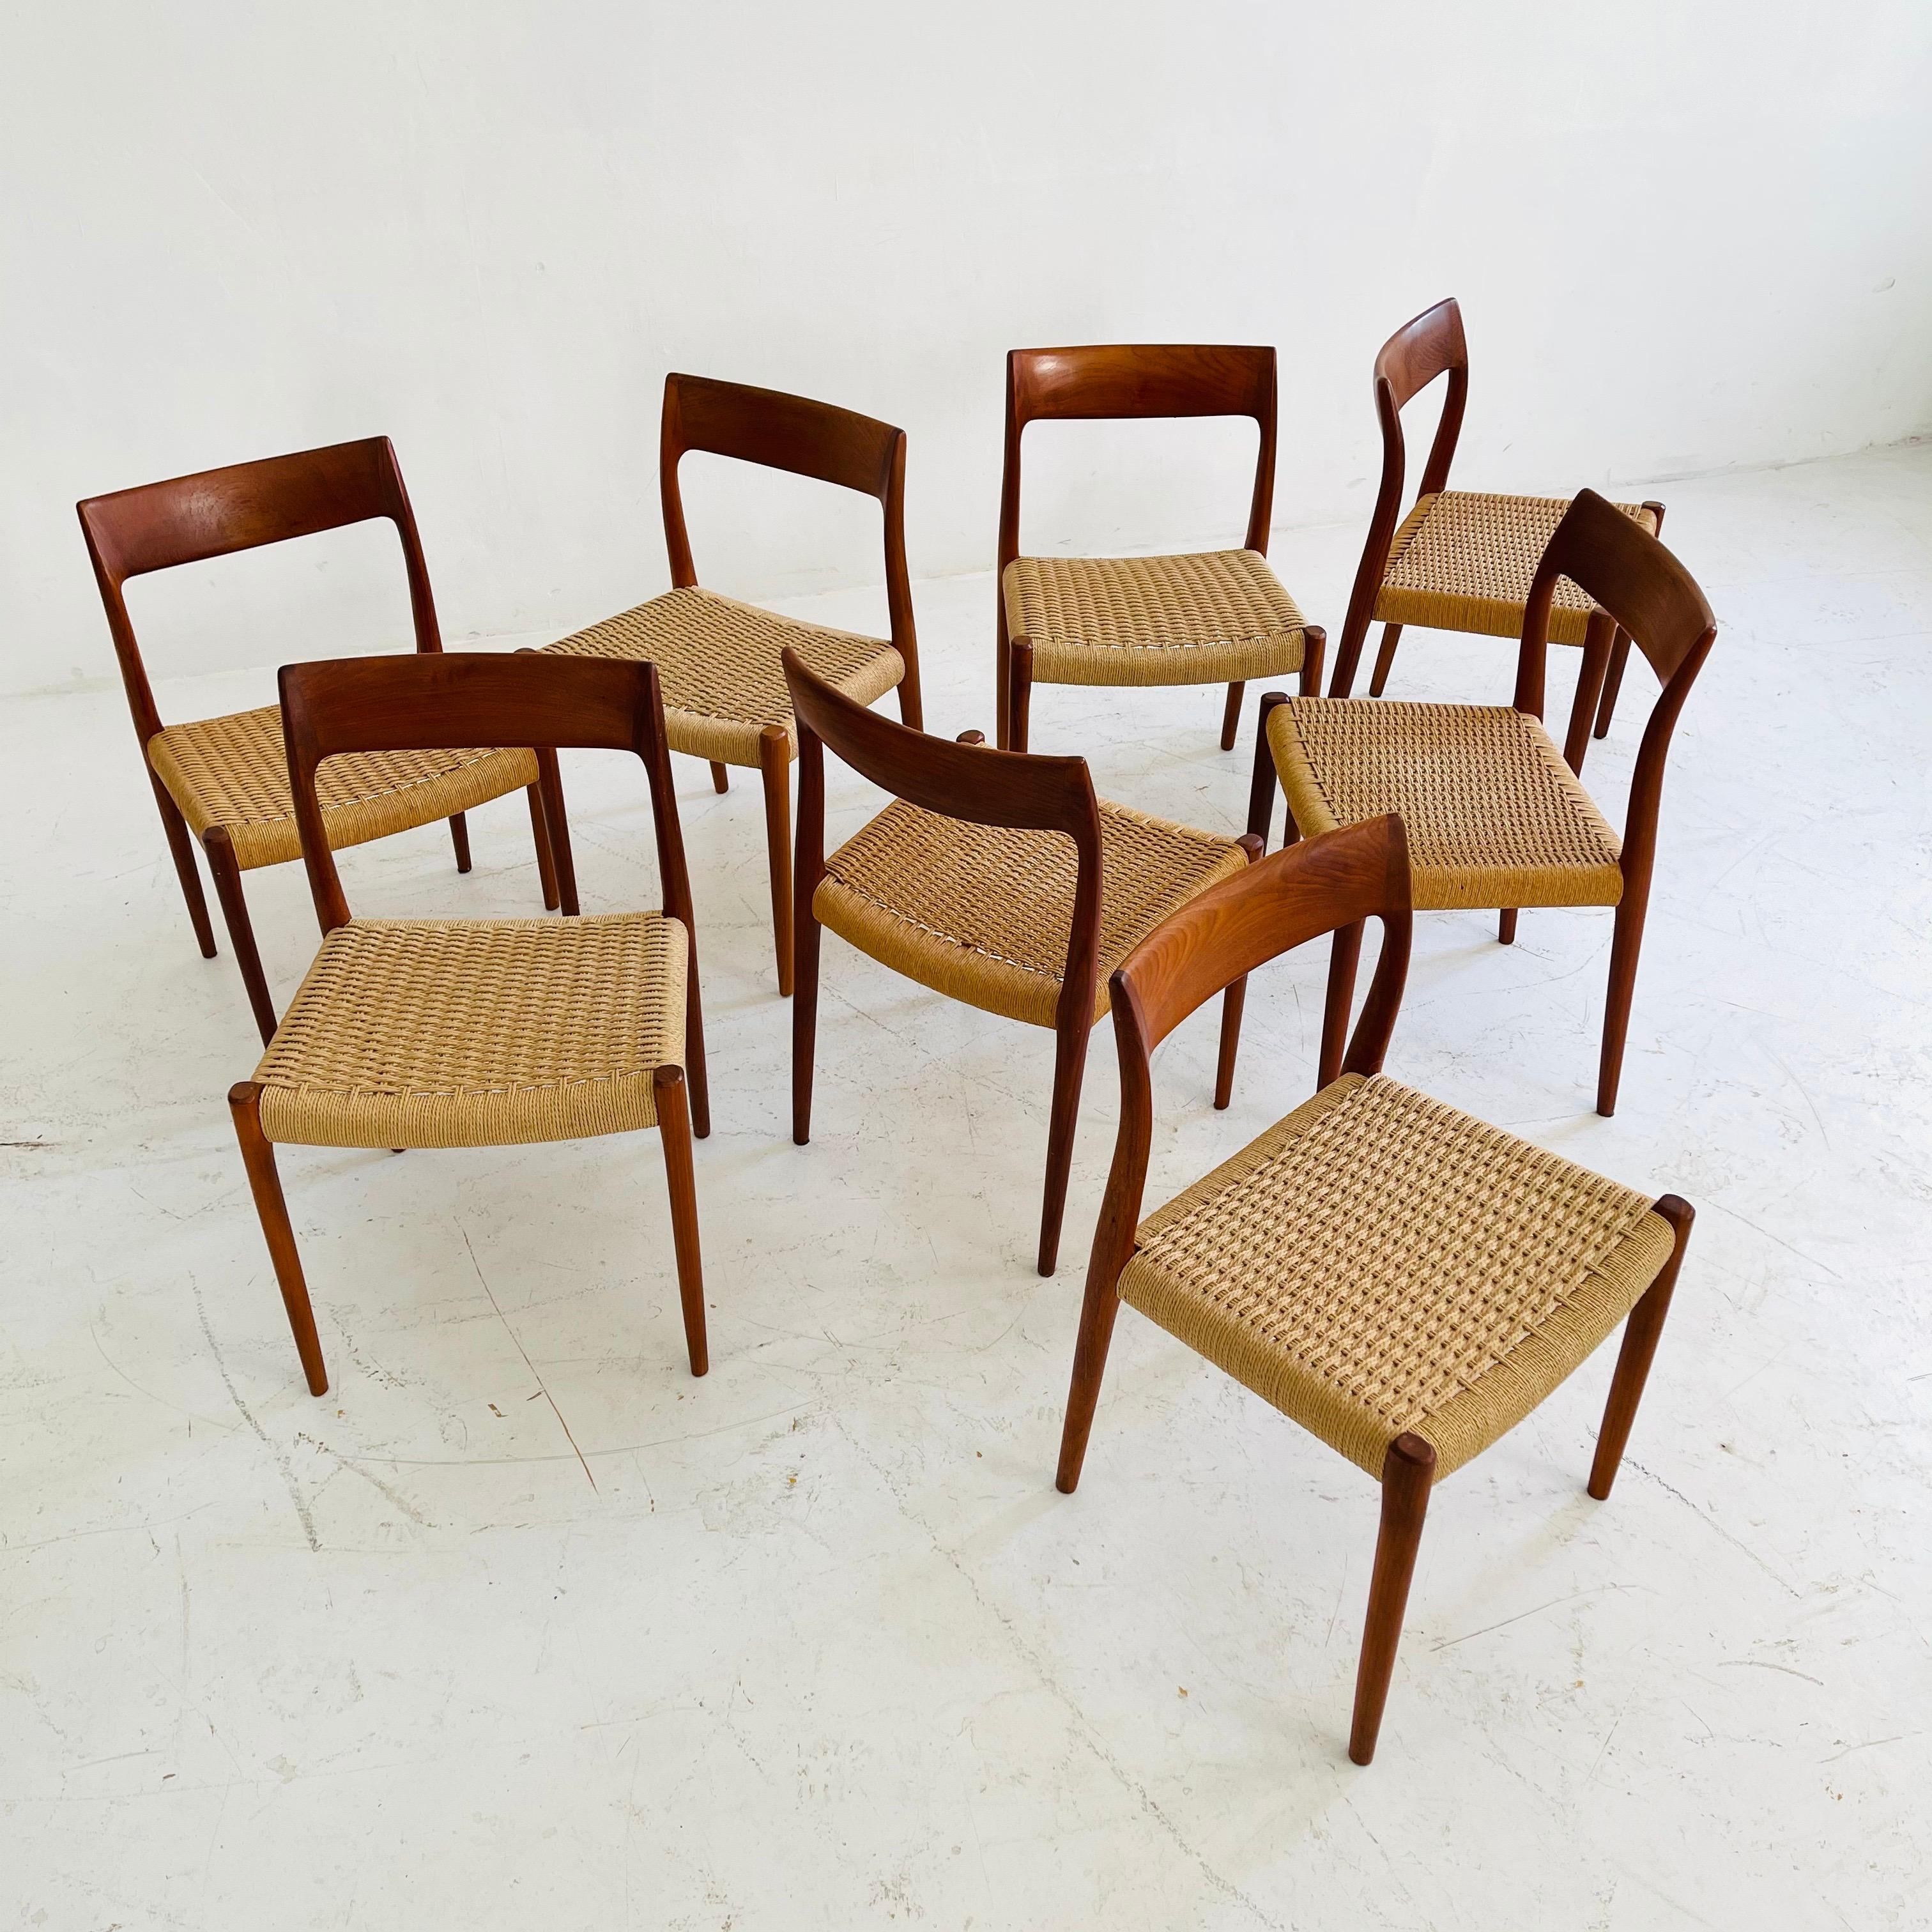 Rope Niels Otto Moller Teak Dining Chair Model No. 77 Set of Eight, Denmark, 1960s